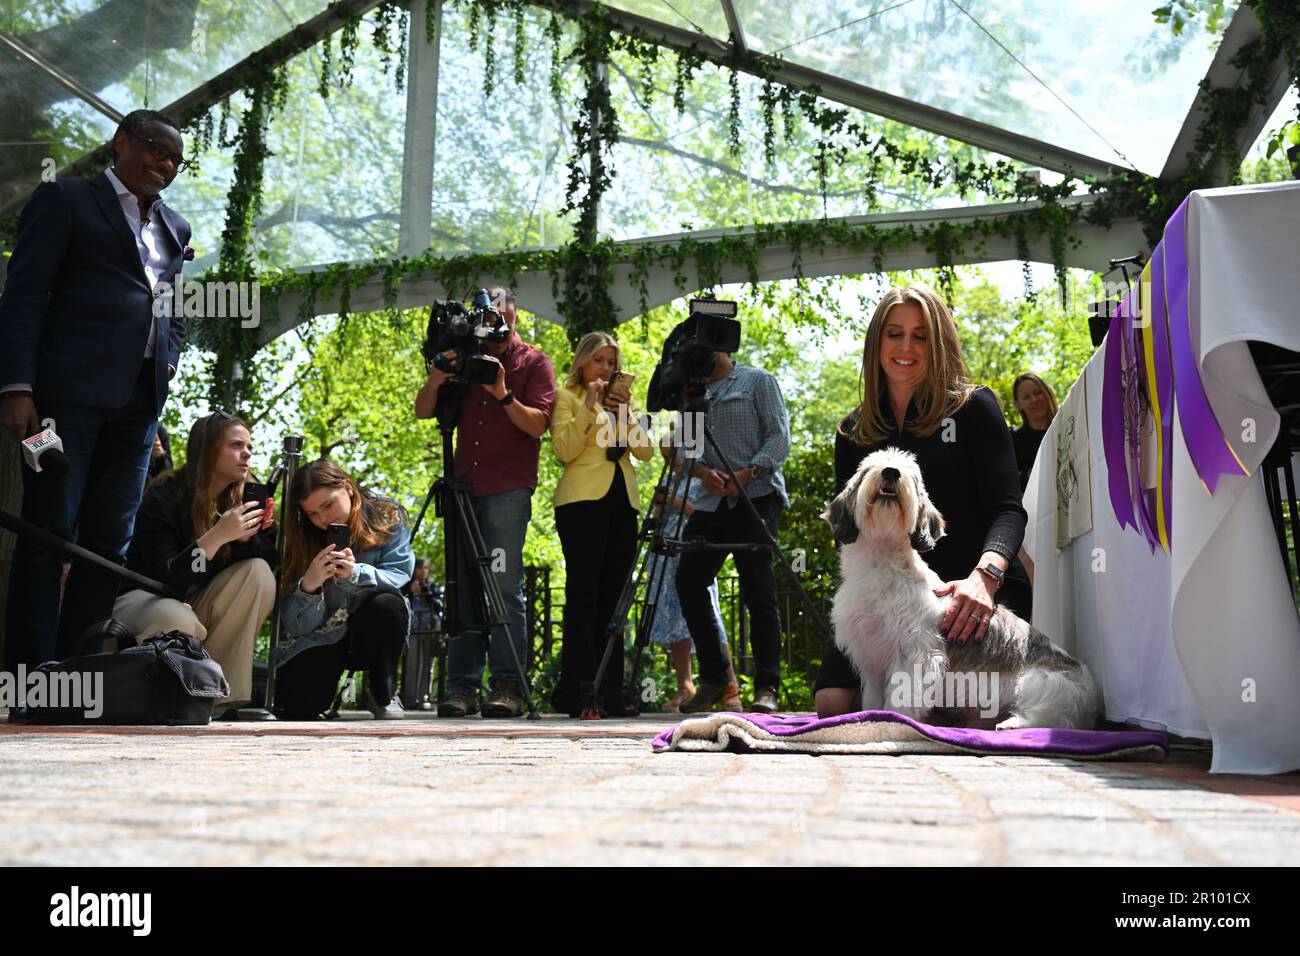 Buddy Holly the Petit Basset Griffon Vendéen (PBGV), winner of Best In Show attends the 147th Annual Westminster Kennel Club Dog Show Champion's Lunch Stock Photo